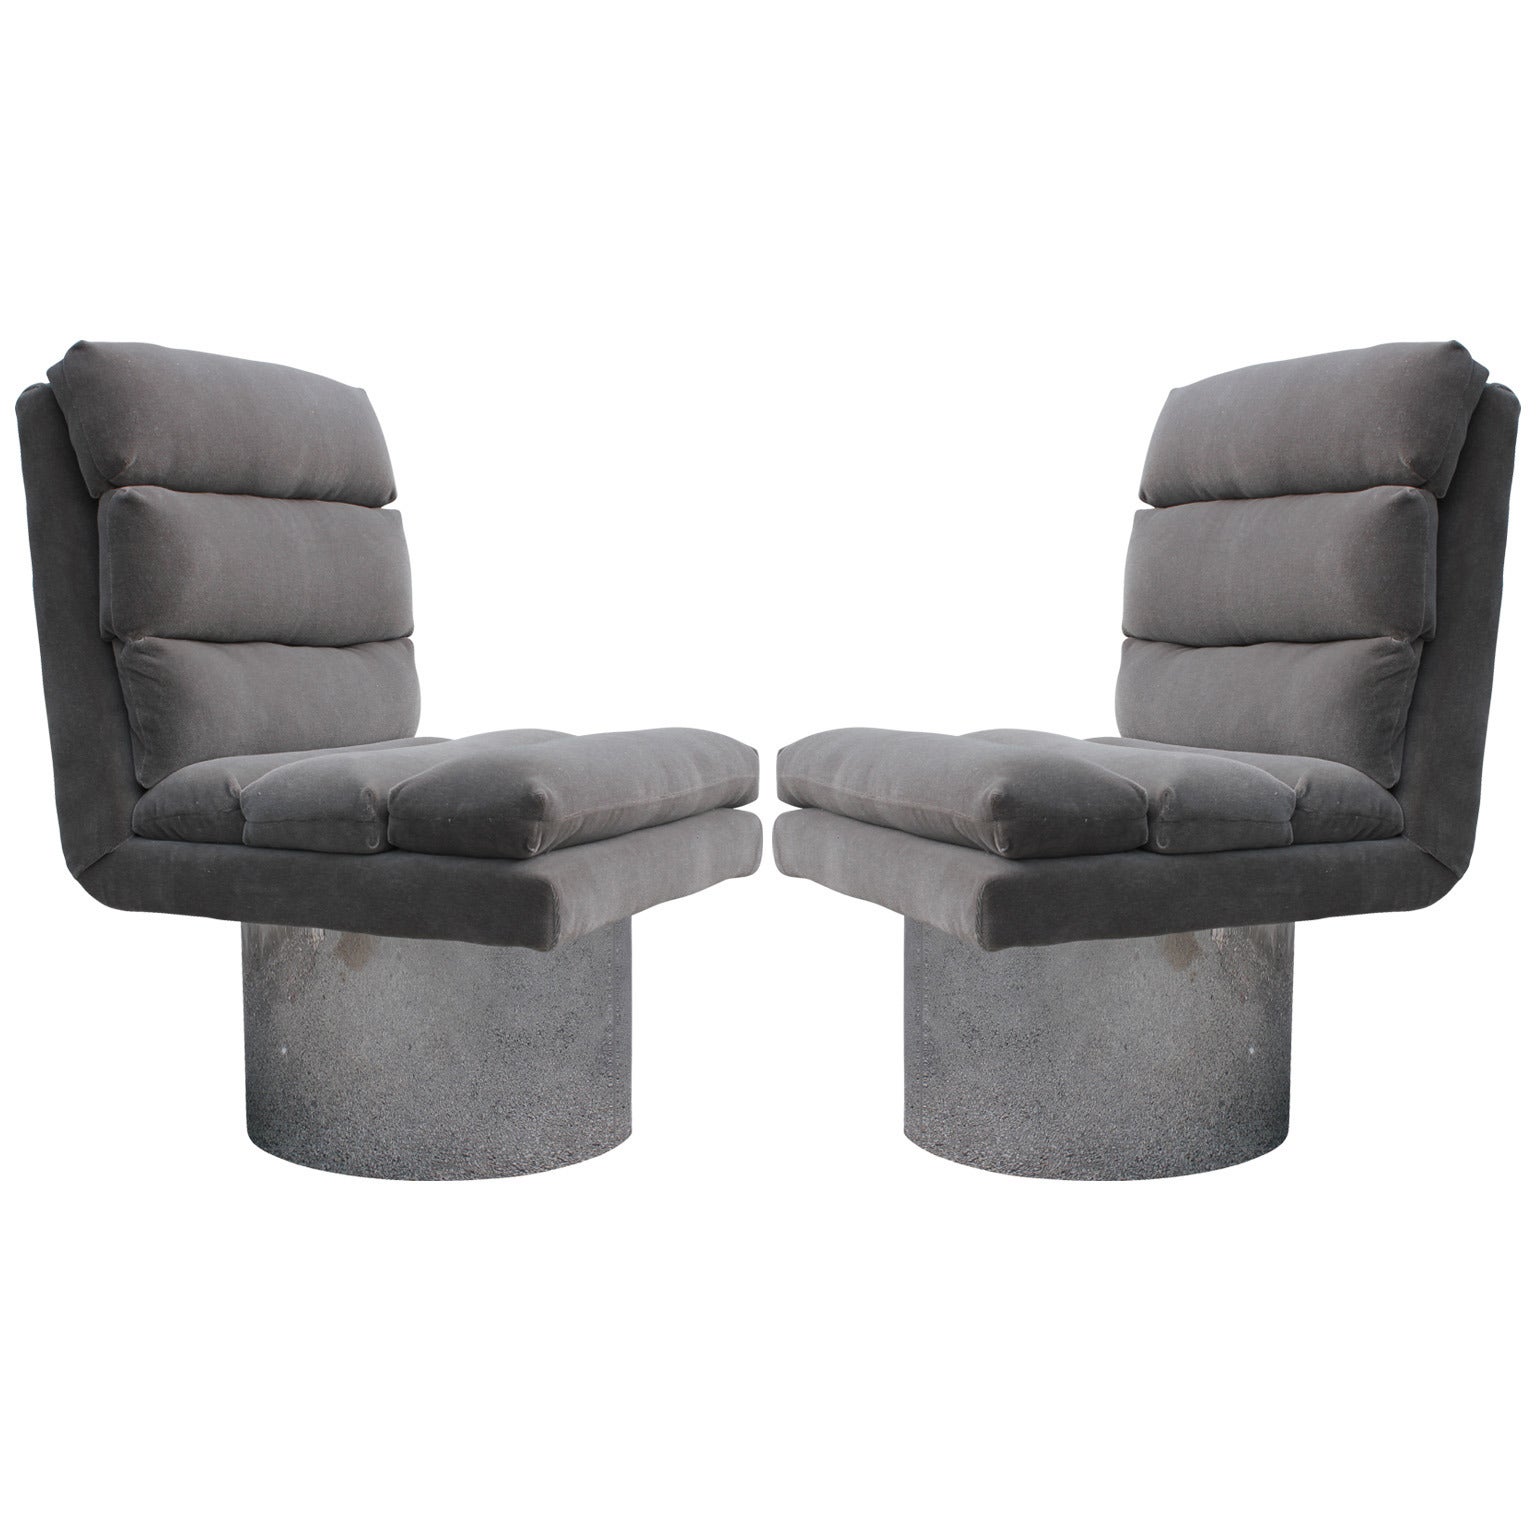 Pair of Modern Chrome Base and Grey Mohair Swivel Lounge Chairs